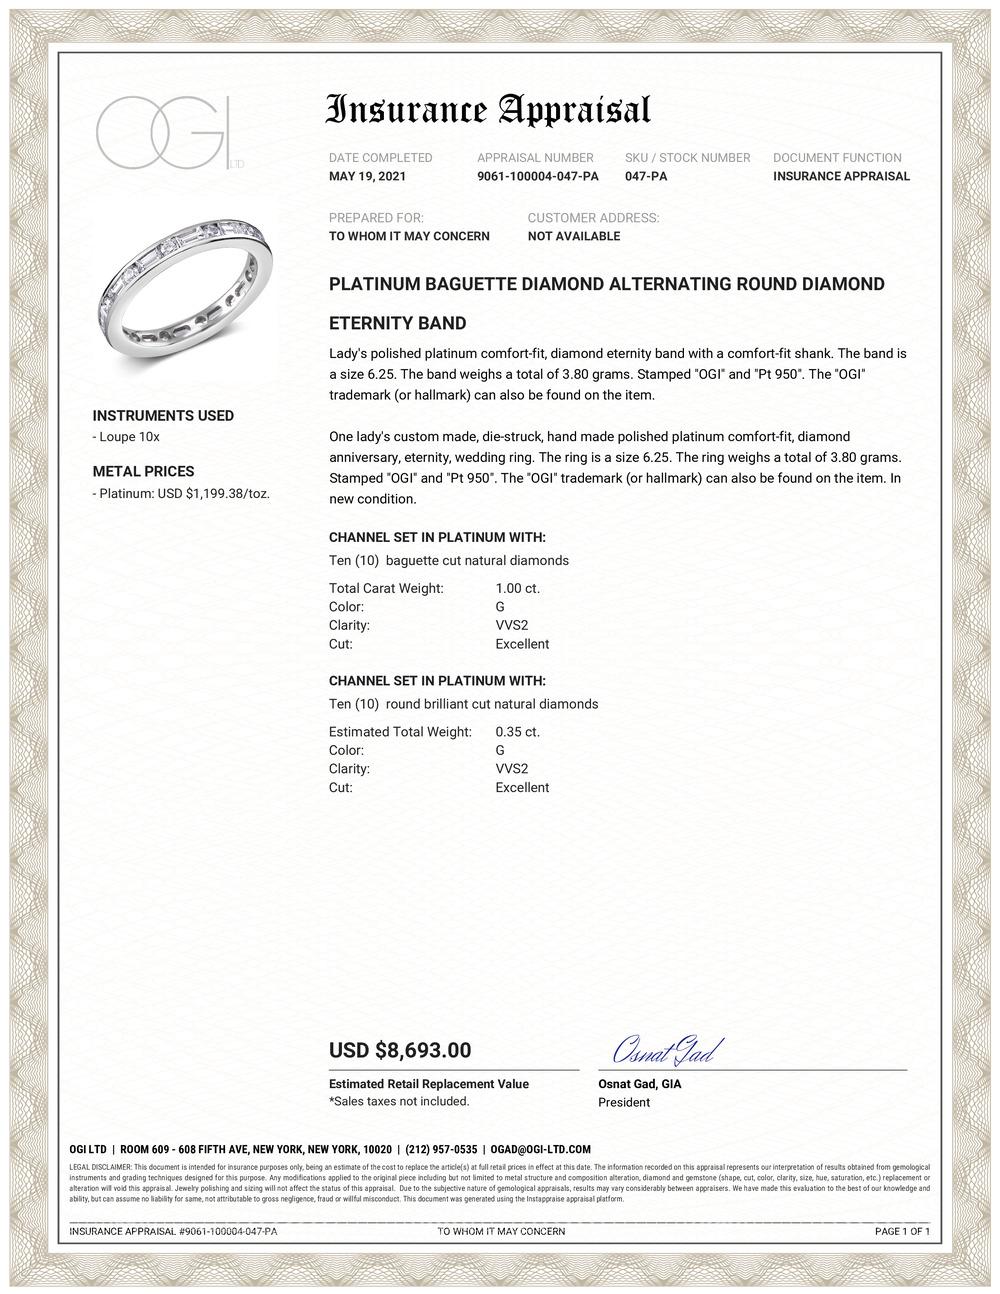 Platinum baguette shape diamond alternating with round diamond channel set ring
Baguette Diamond weighing 1.00 carat
Round diamond weighing 0.35 carats
Diamond quality G VS
New Ring
Three-millimeter eternity wedding ring 
Ring size 6.25 In